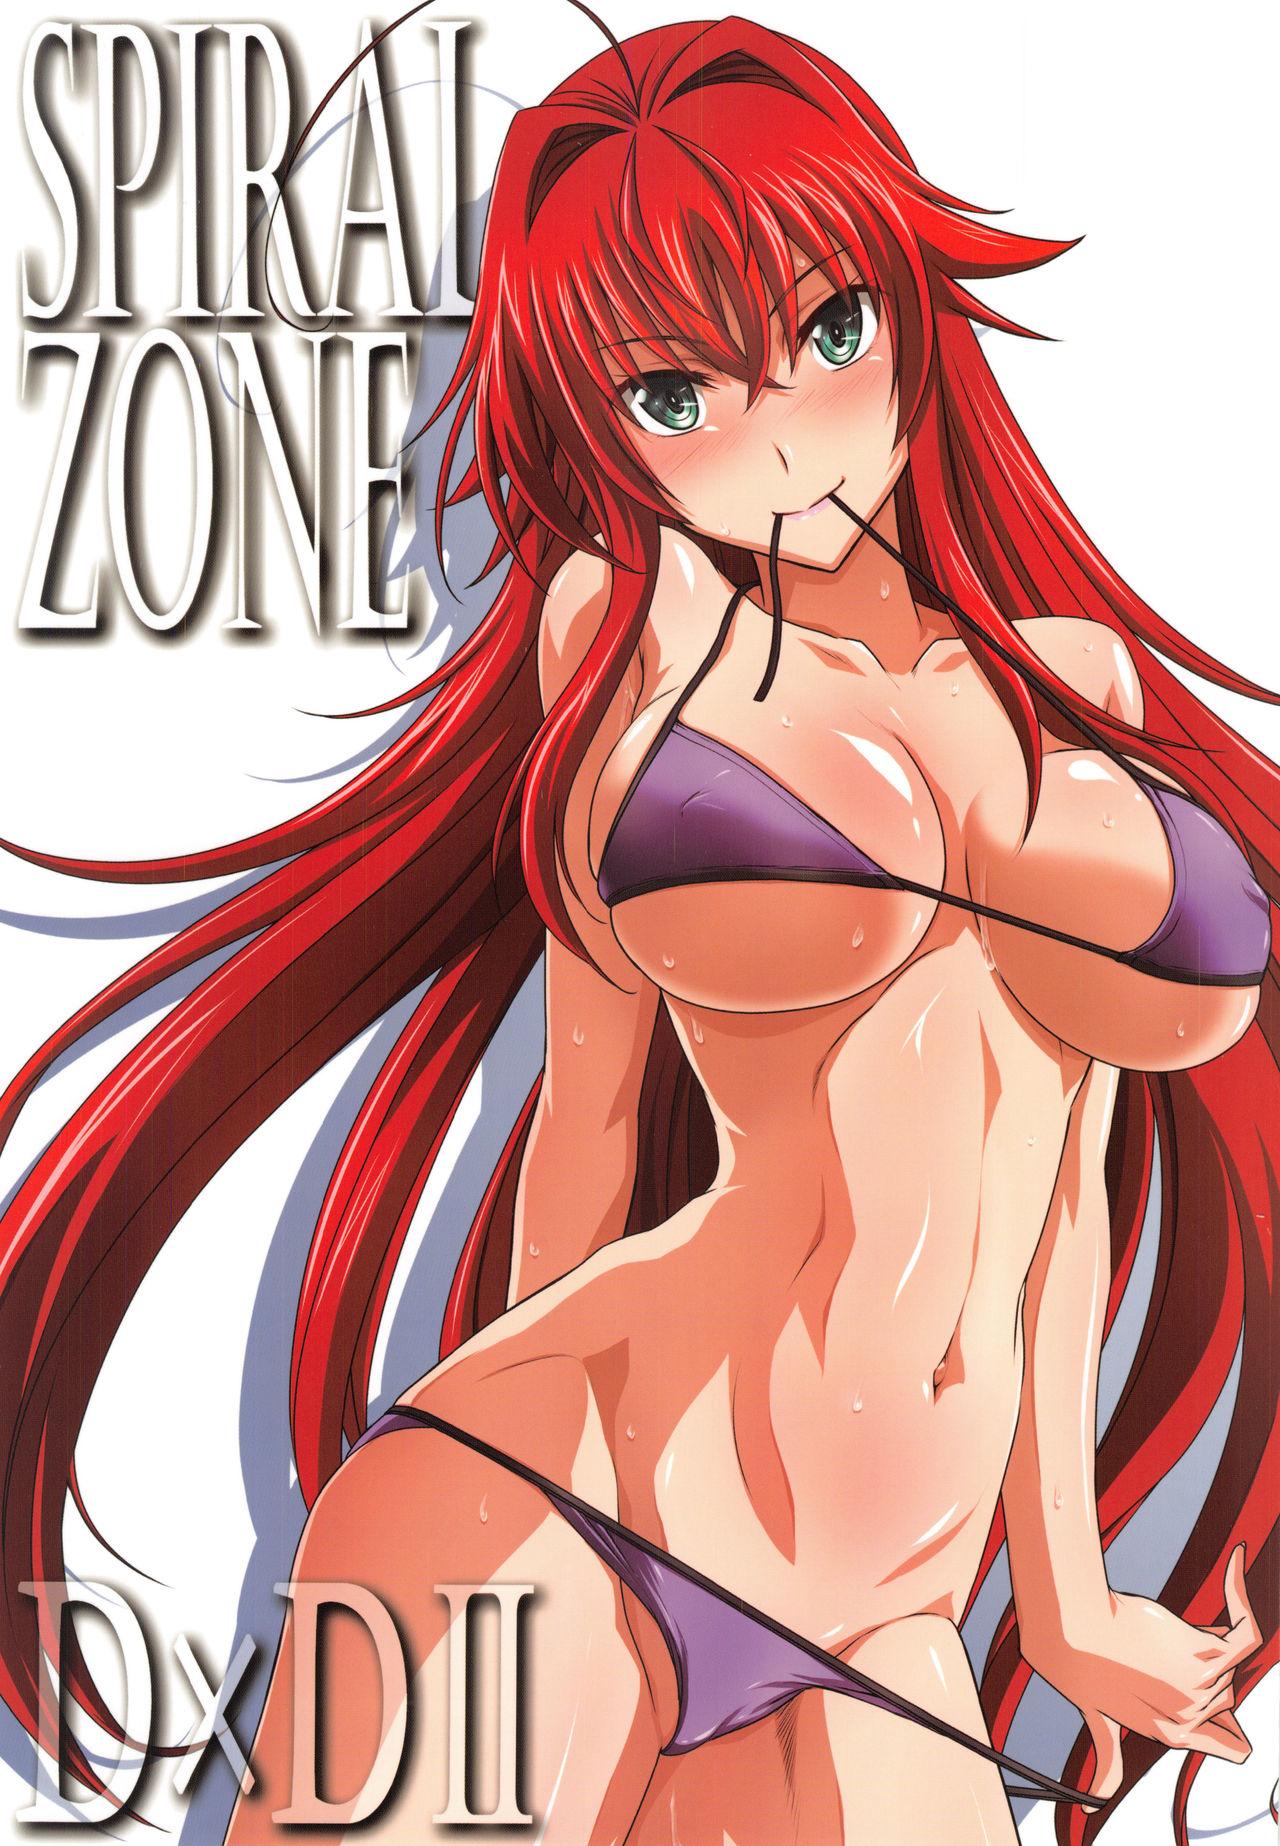 Trans SPIRAL ZONE DxD II - Highschool dxd Step Brother - Page 1